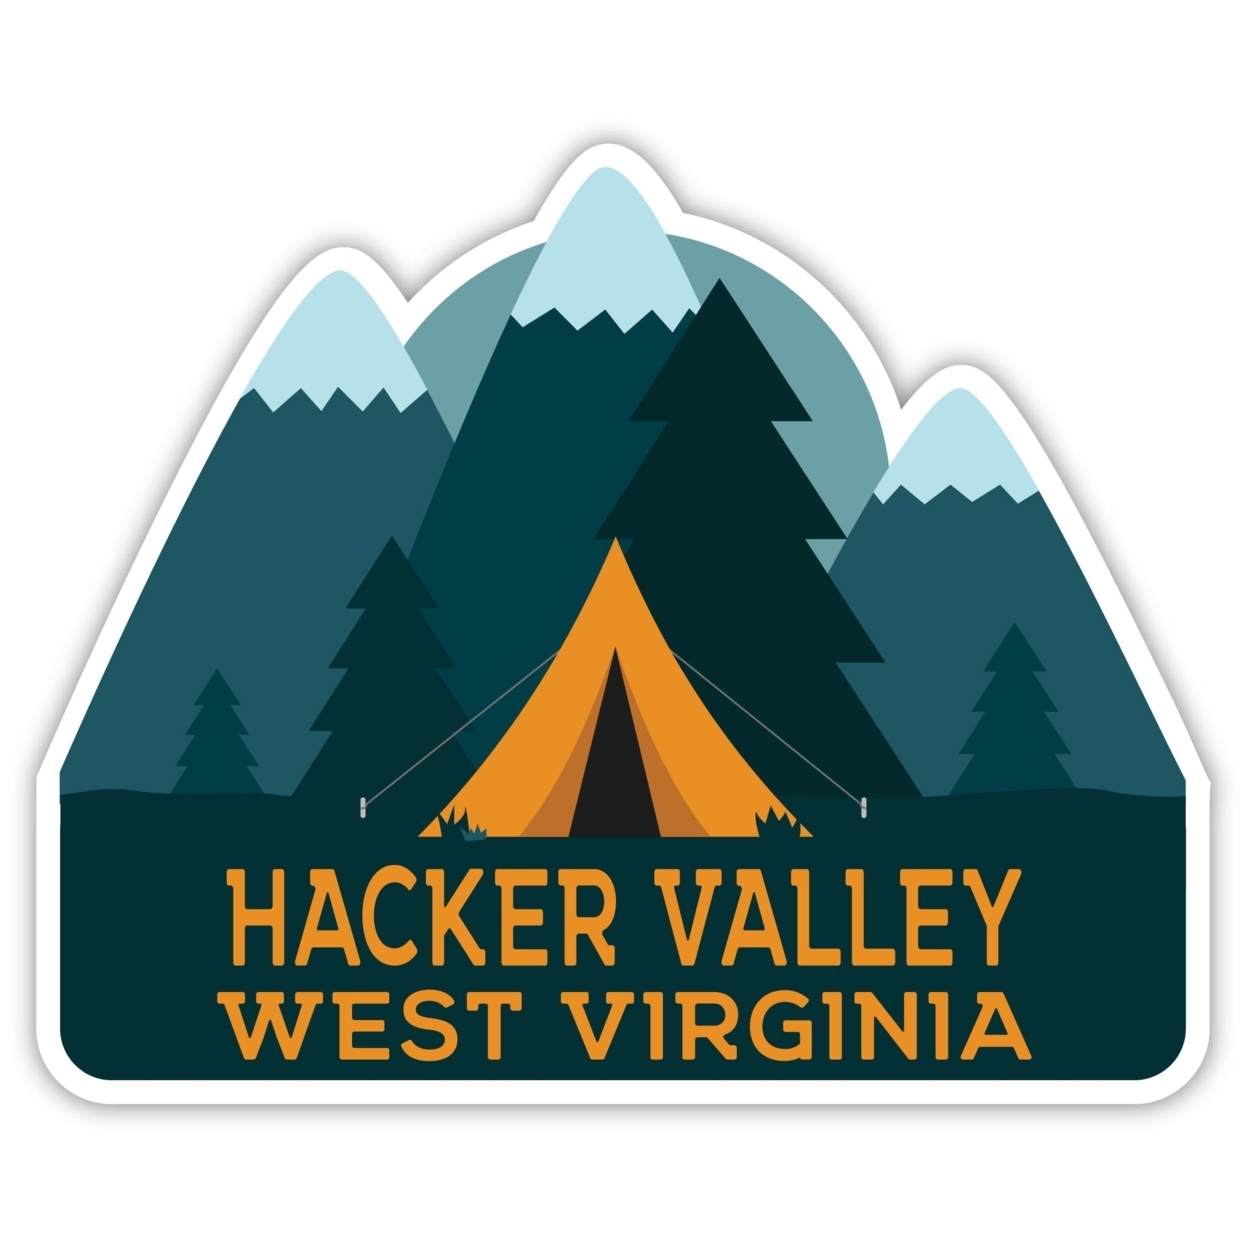 Hacker Valley West Virginia Souvenir Decorative Stickers (Choose Theme And Size) - 4-Pack, 10-Inch, Tent